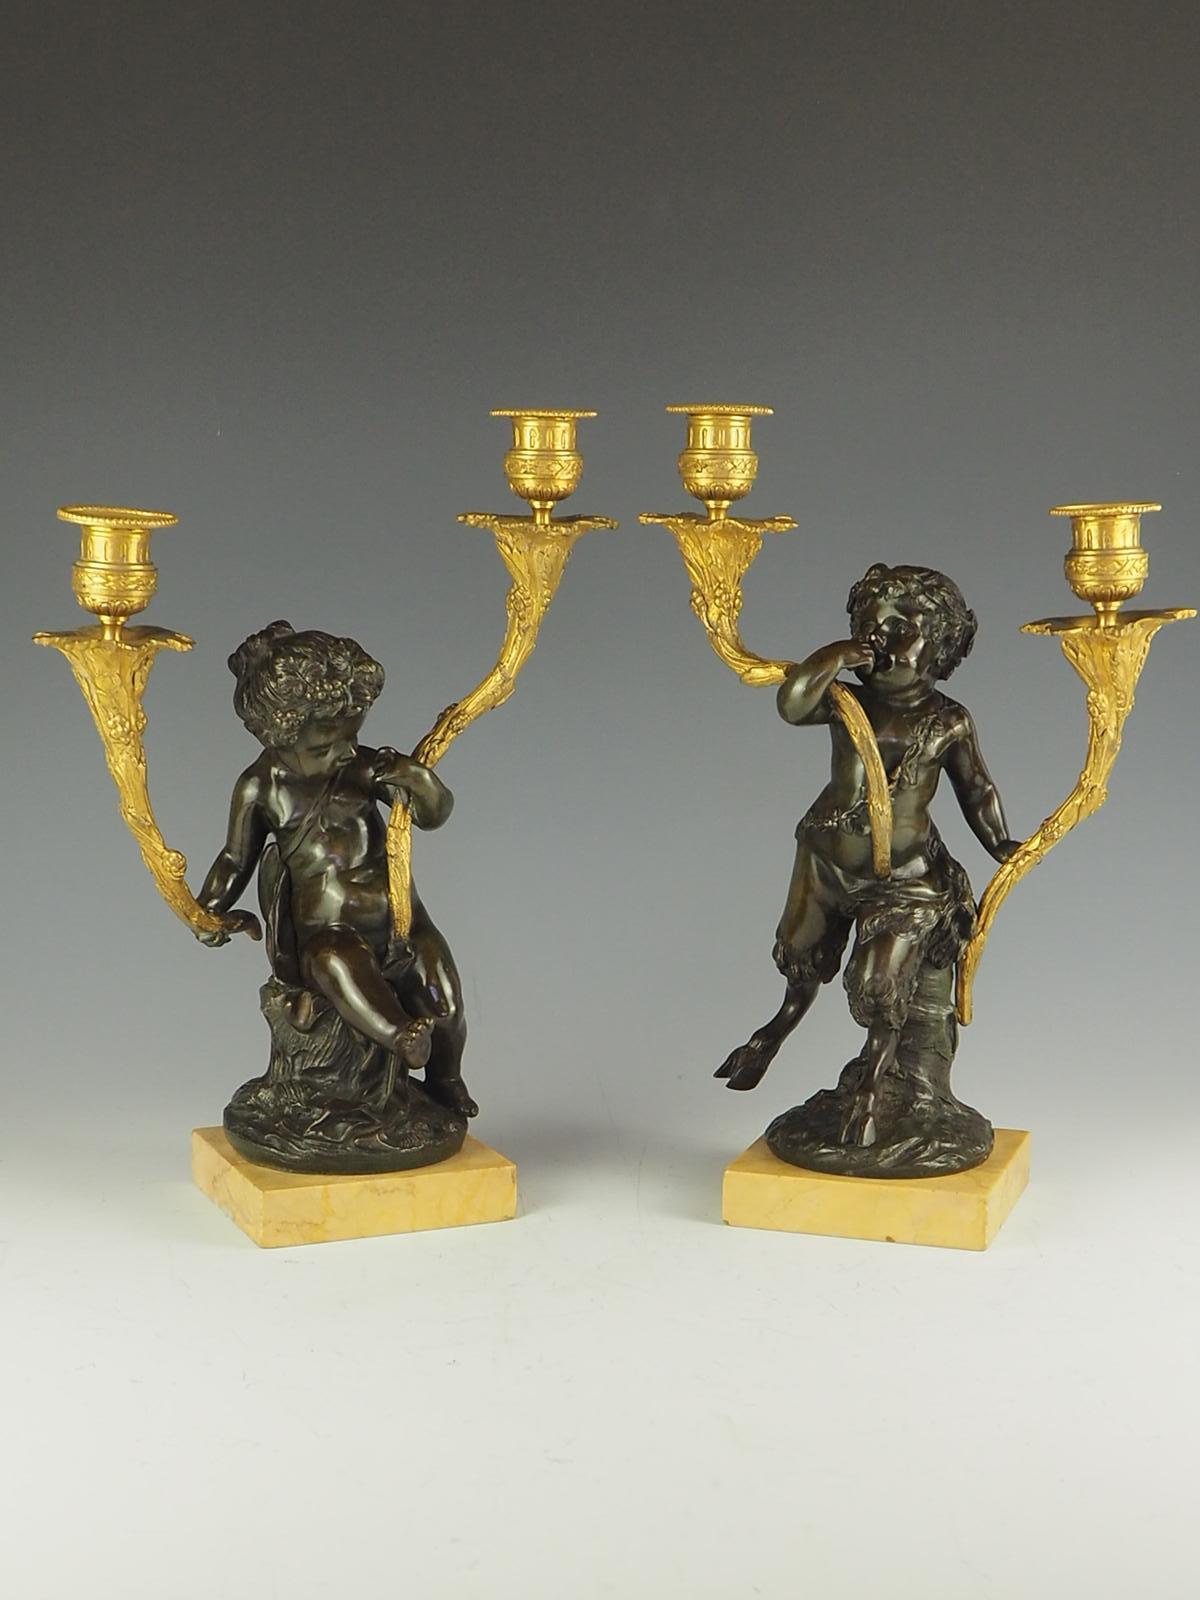 A very fine quality pair of French Louis XV inspired patinated and gilt bronze putti twin arm candelabra depicting Bacchanal figures.

Each bronze sculpture supports two gilded bronze candleholders and figures resting on a marble plinth

The